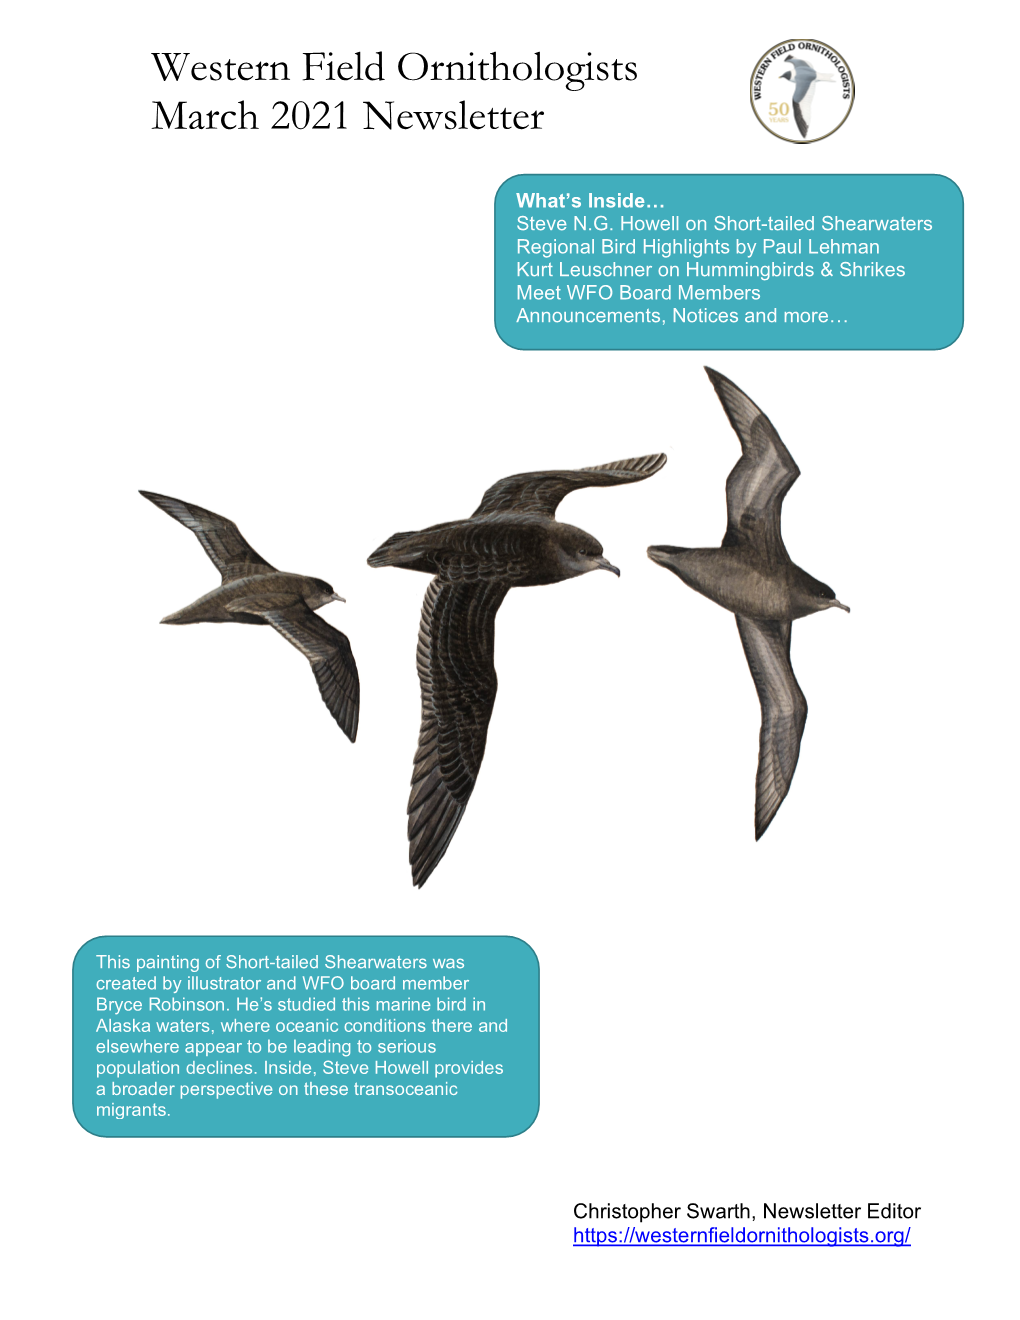 Western Field Ornithologists March 2021 Newsletter